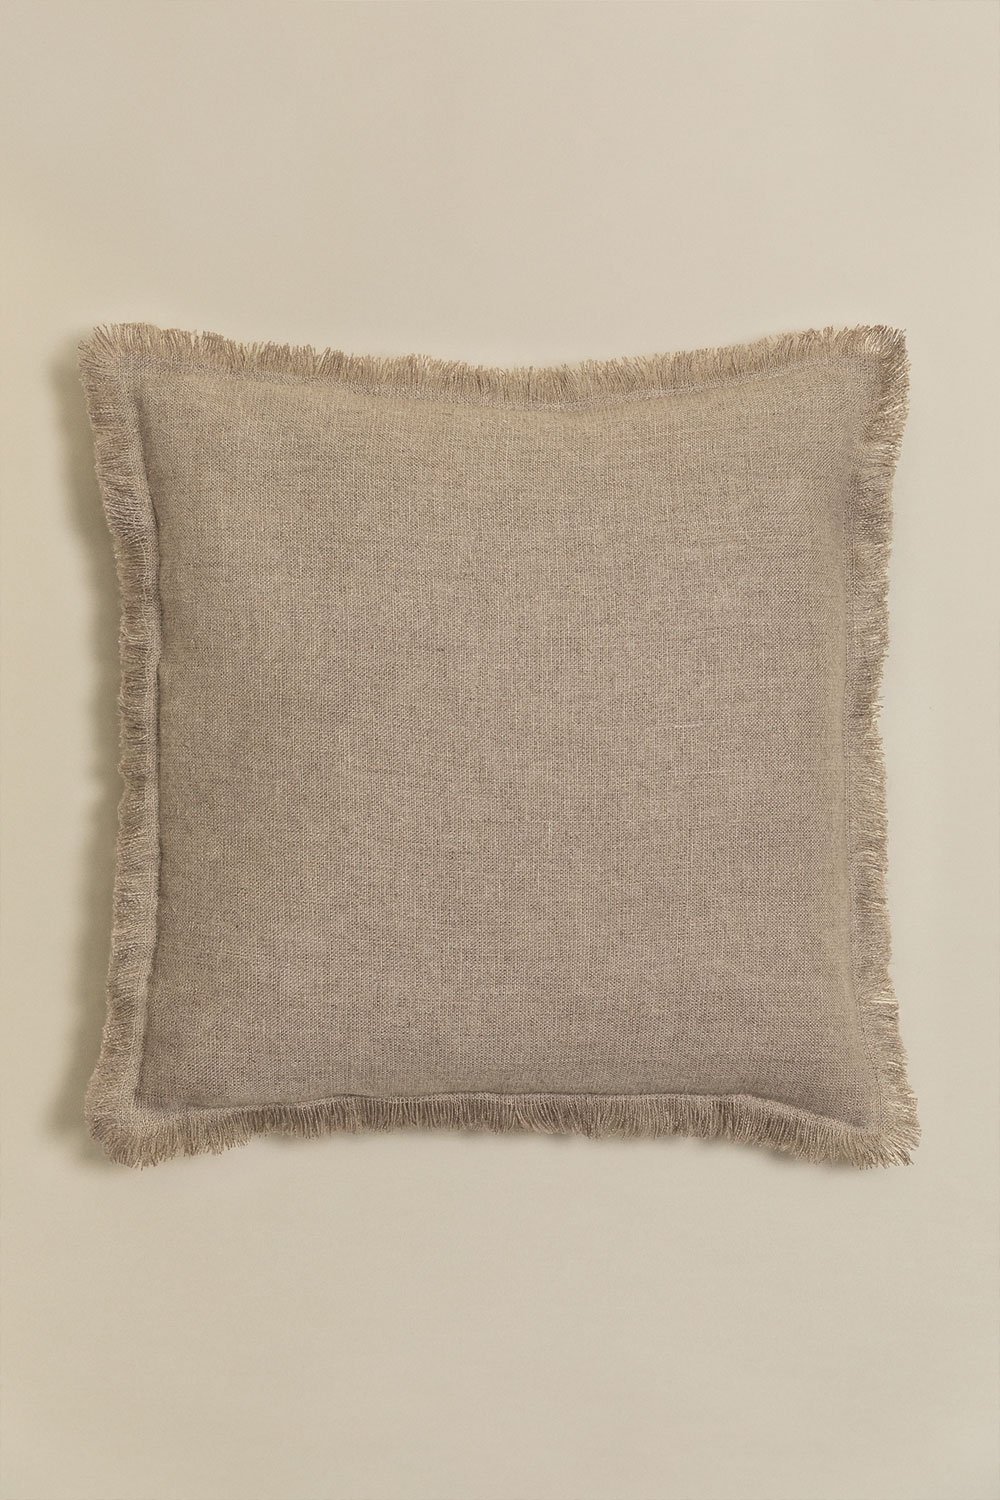 Square Cotton and Linen Cushion (45x45 cm) Glenfern, gallery image 1